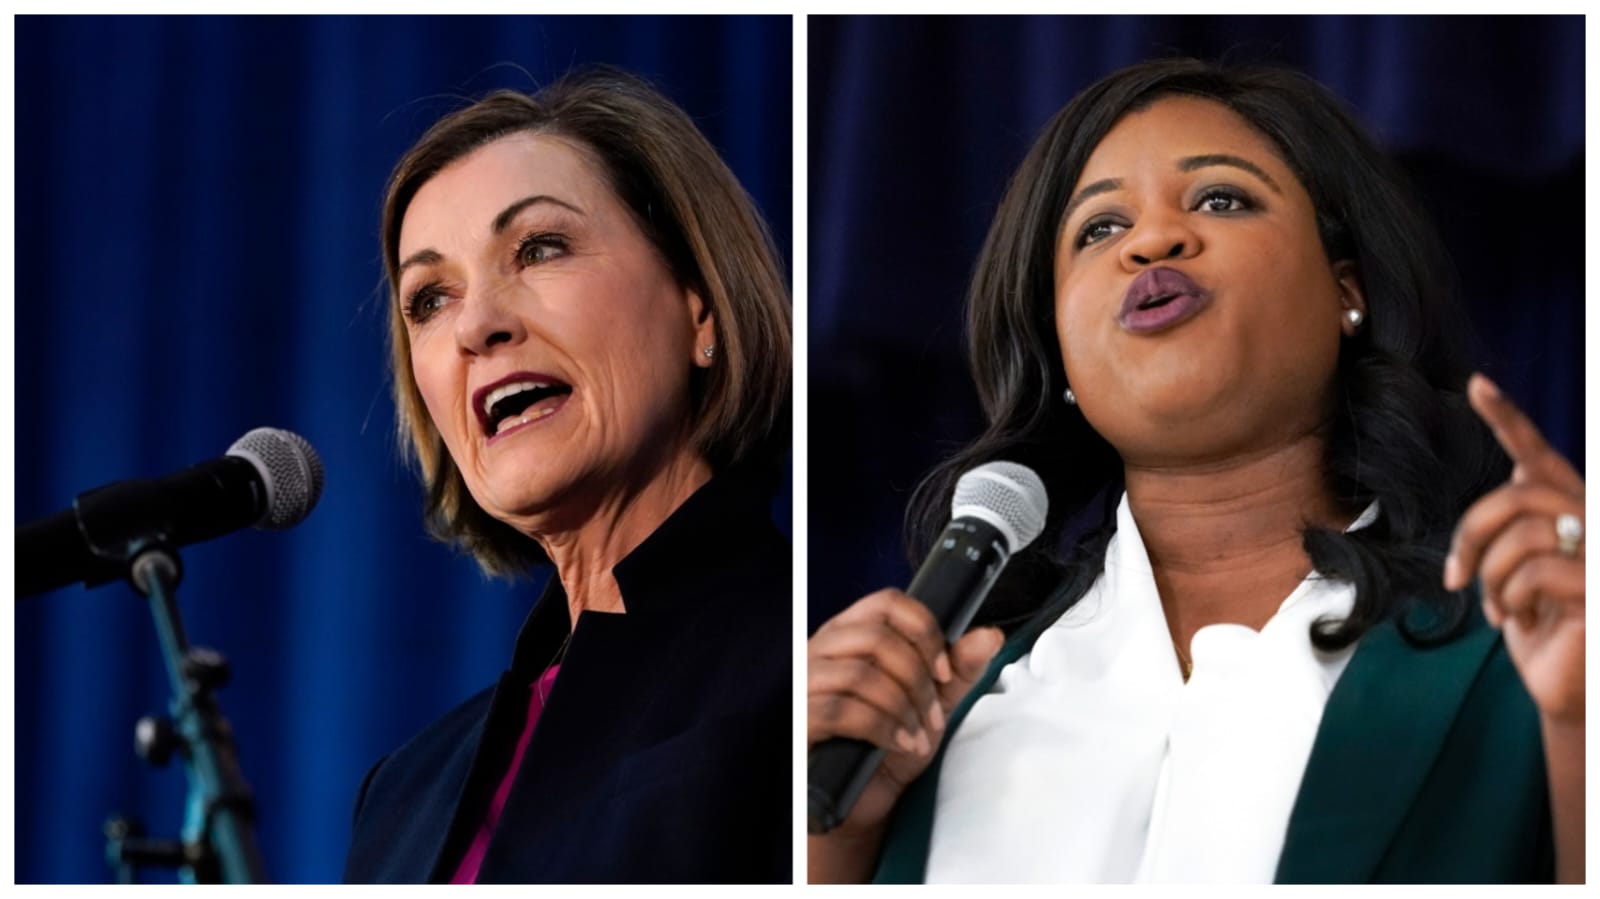 Iowa makes history, confirms an all-female governor ballot for US midterms